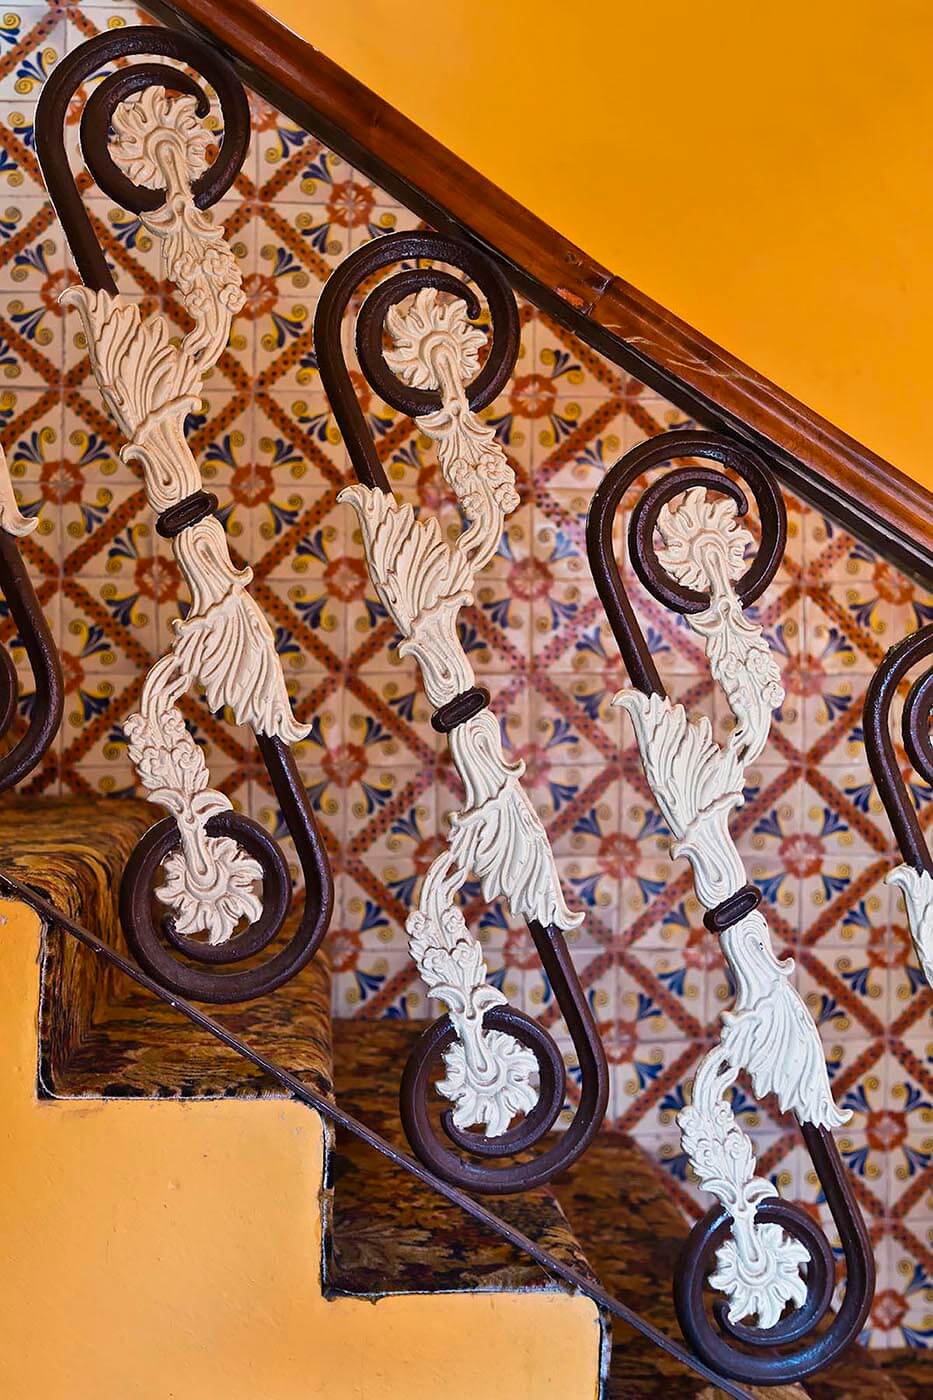 Stairway banister inside the classic HOTEL PASADA DE SANTA FE in GUANAJUATO, MEXICO.  - Architecture photography by Eagle Visions Photography